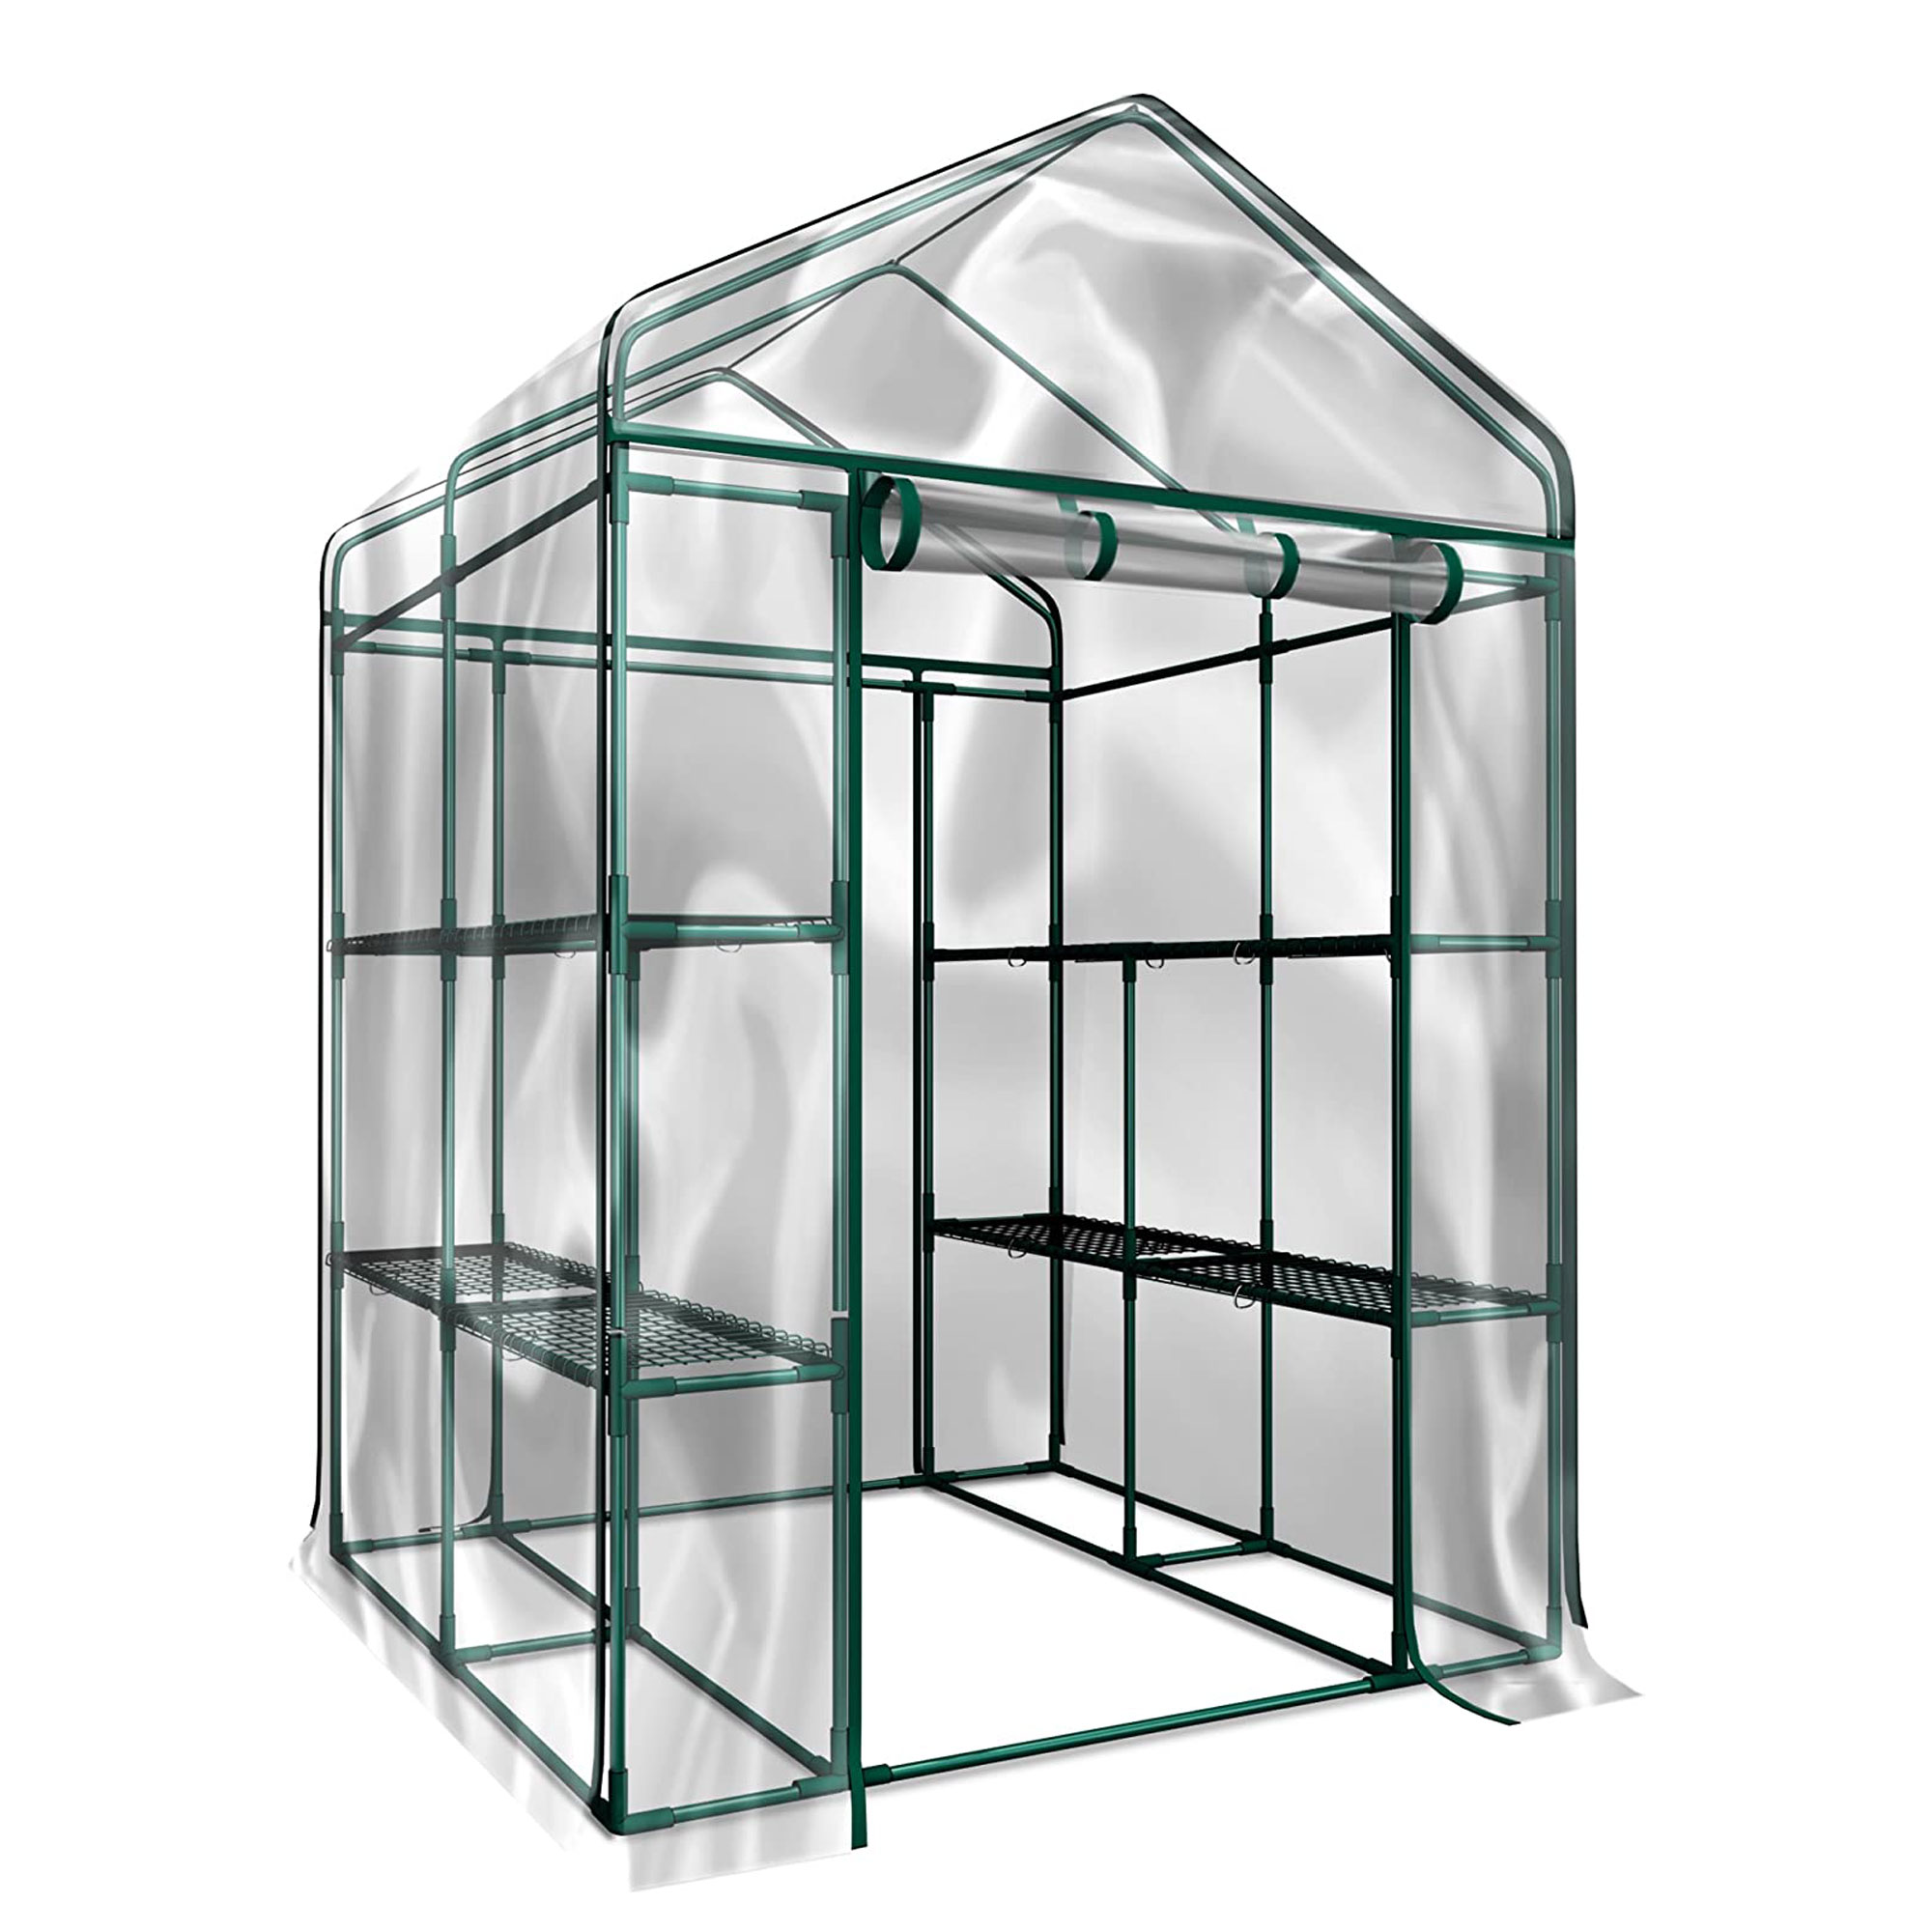 Casainc Green House 56" W x 56" D x 76" H,Walk in Outdoor Plant Gardening Greenhouse 2 Tiers 8 Shelves - Window and Anchors Include(White)-CASAINC